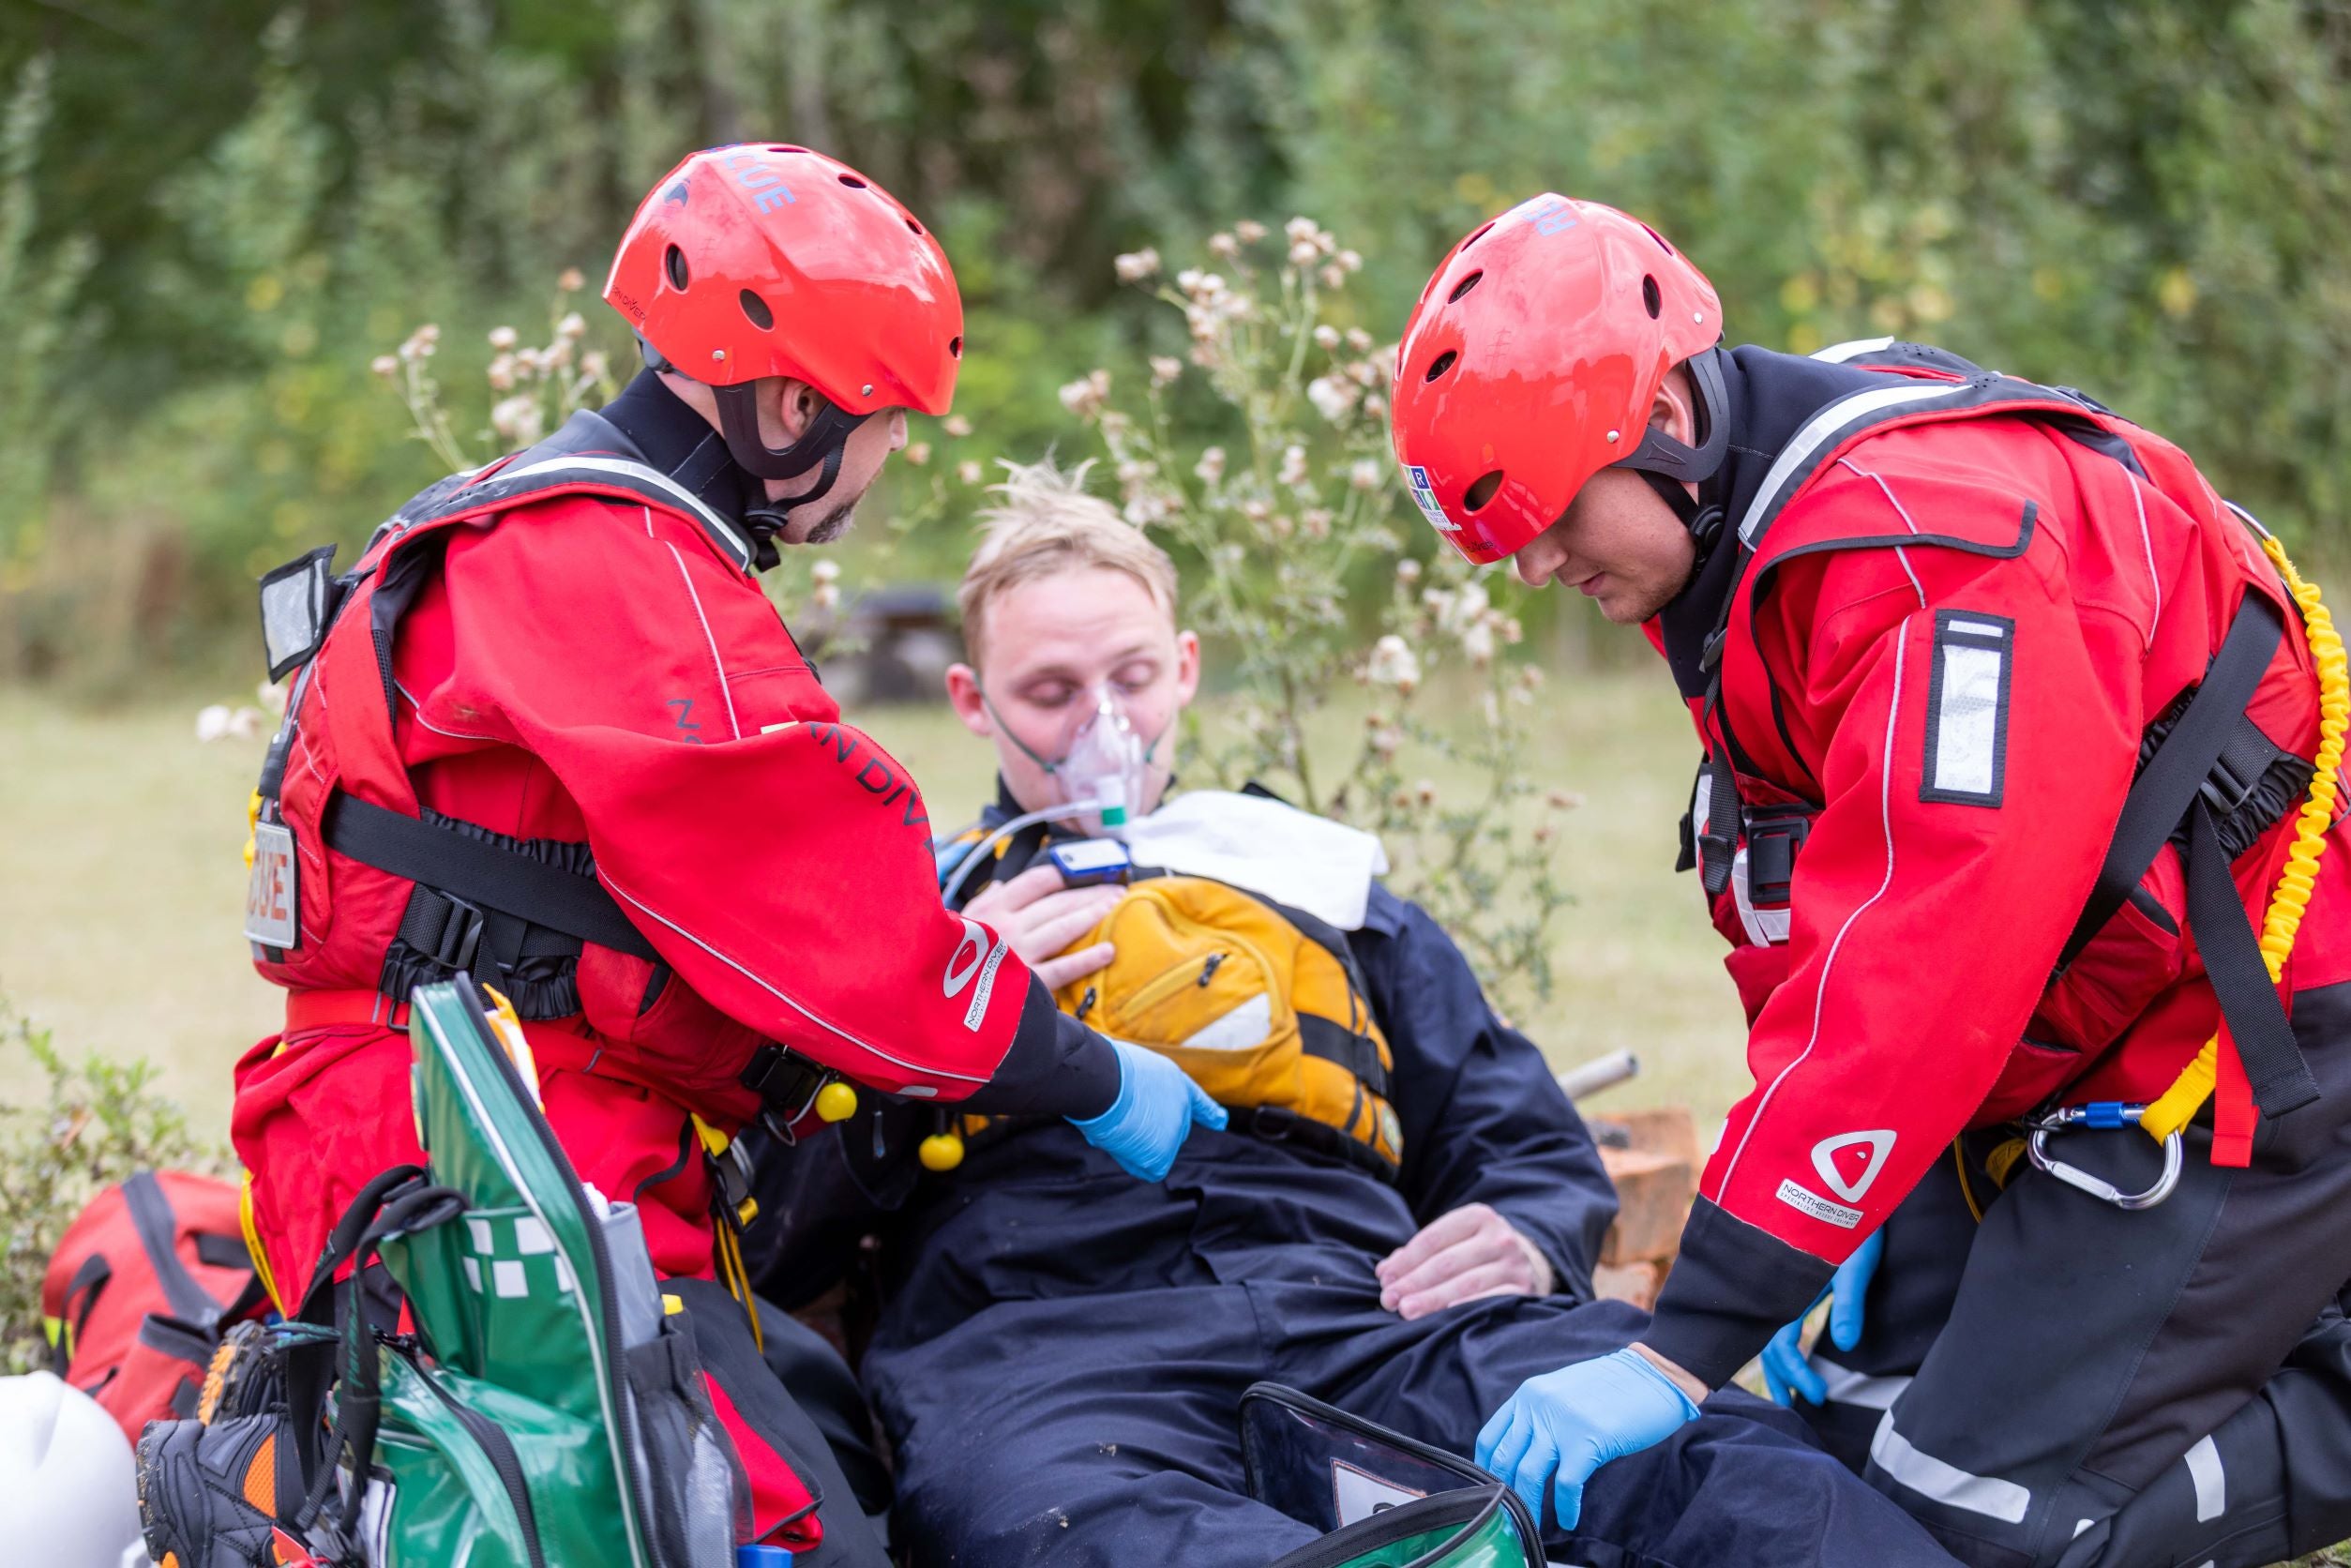 Providing emergency first aid to a casualty